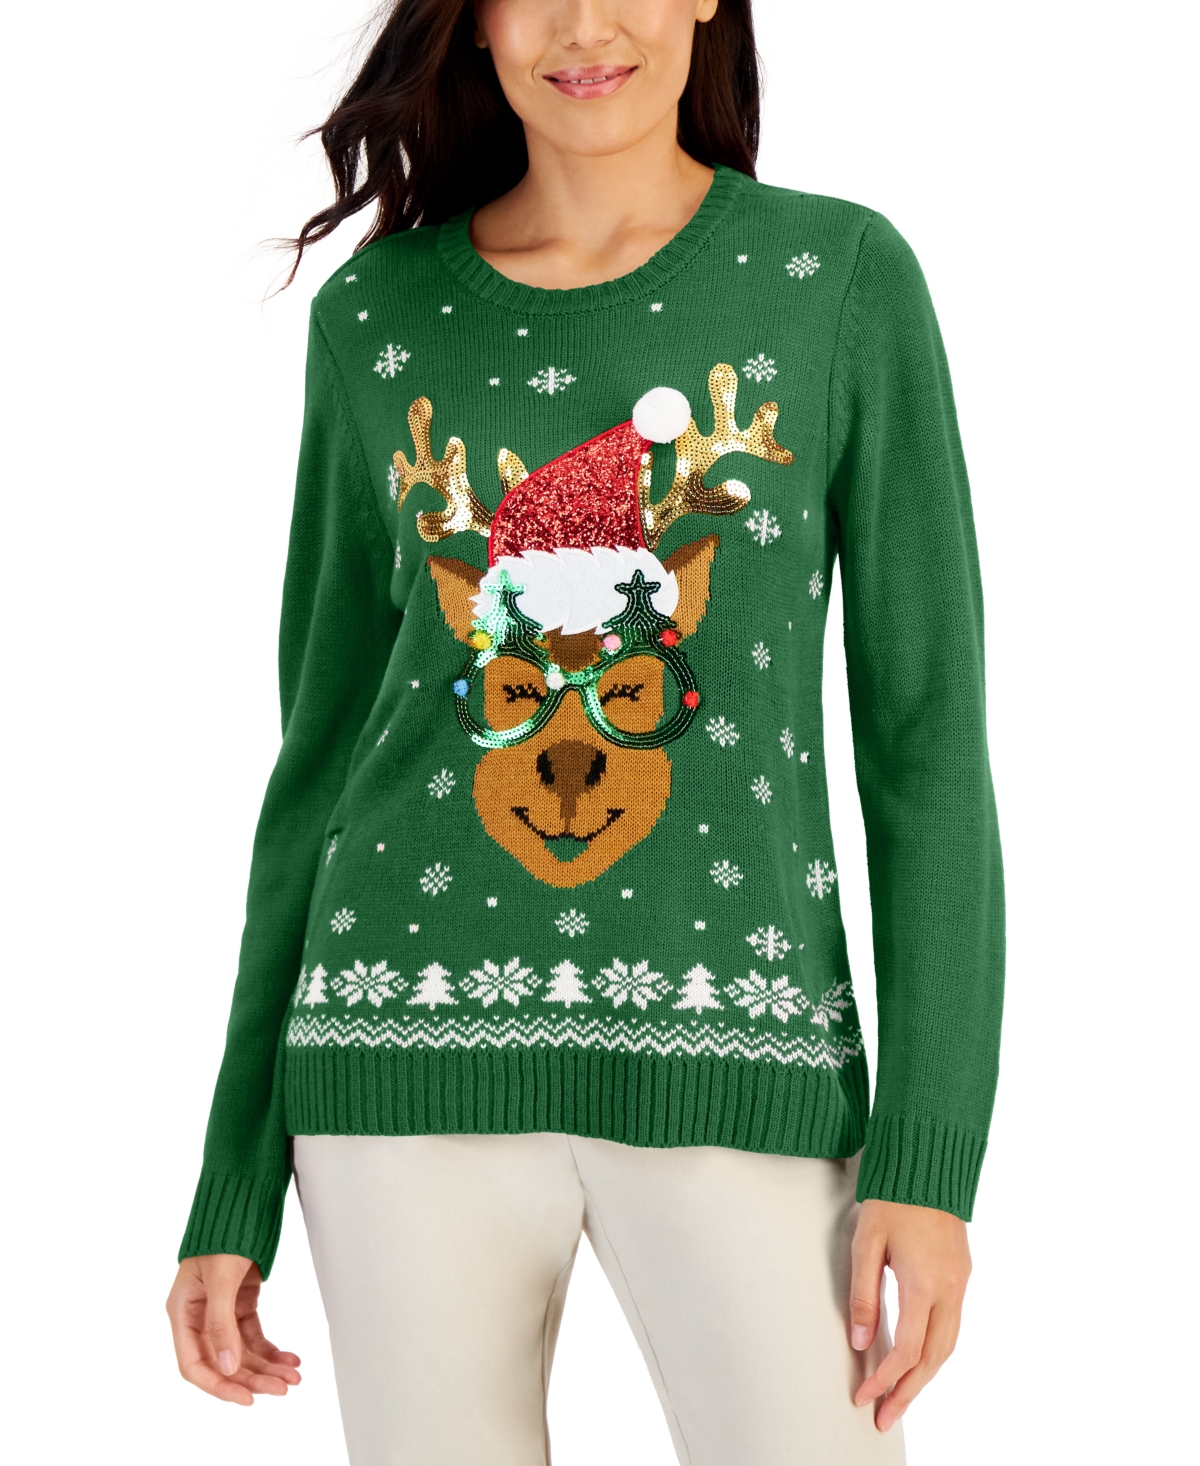 Women's Holiday Sweater, Created for Macy's - Marine Green Reindeer